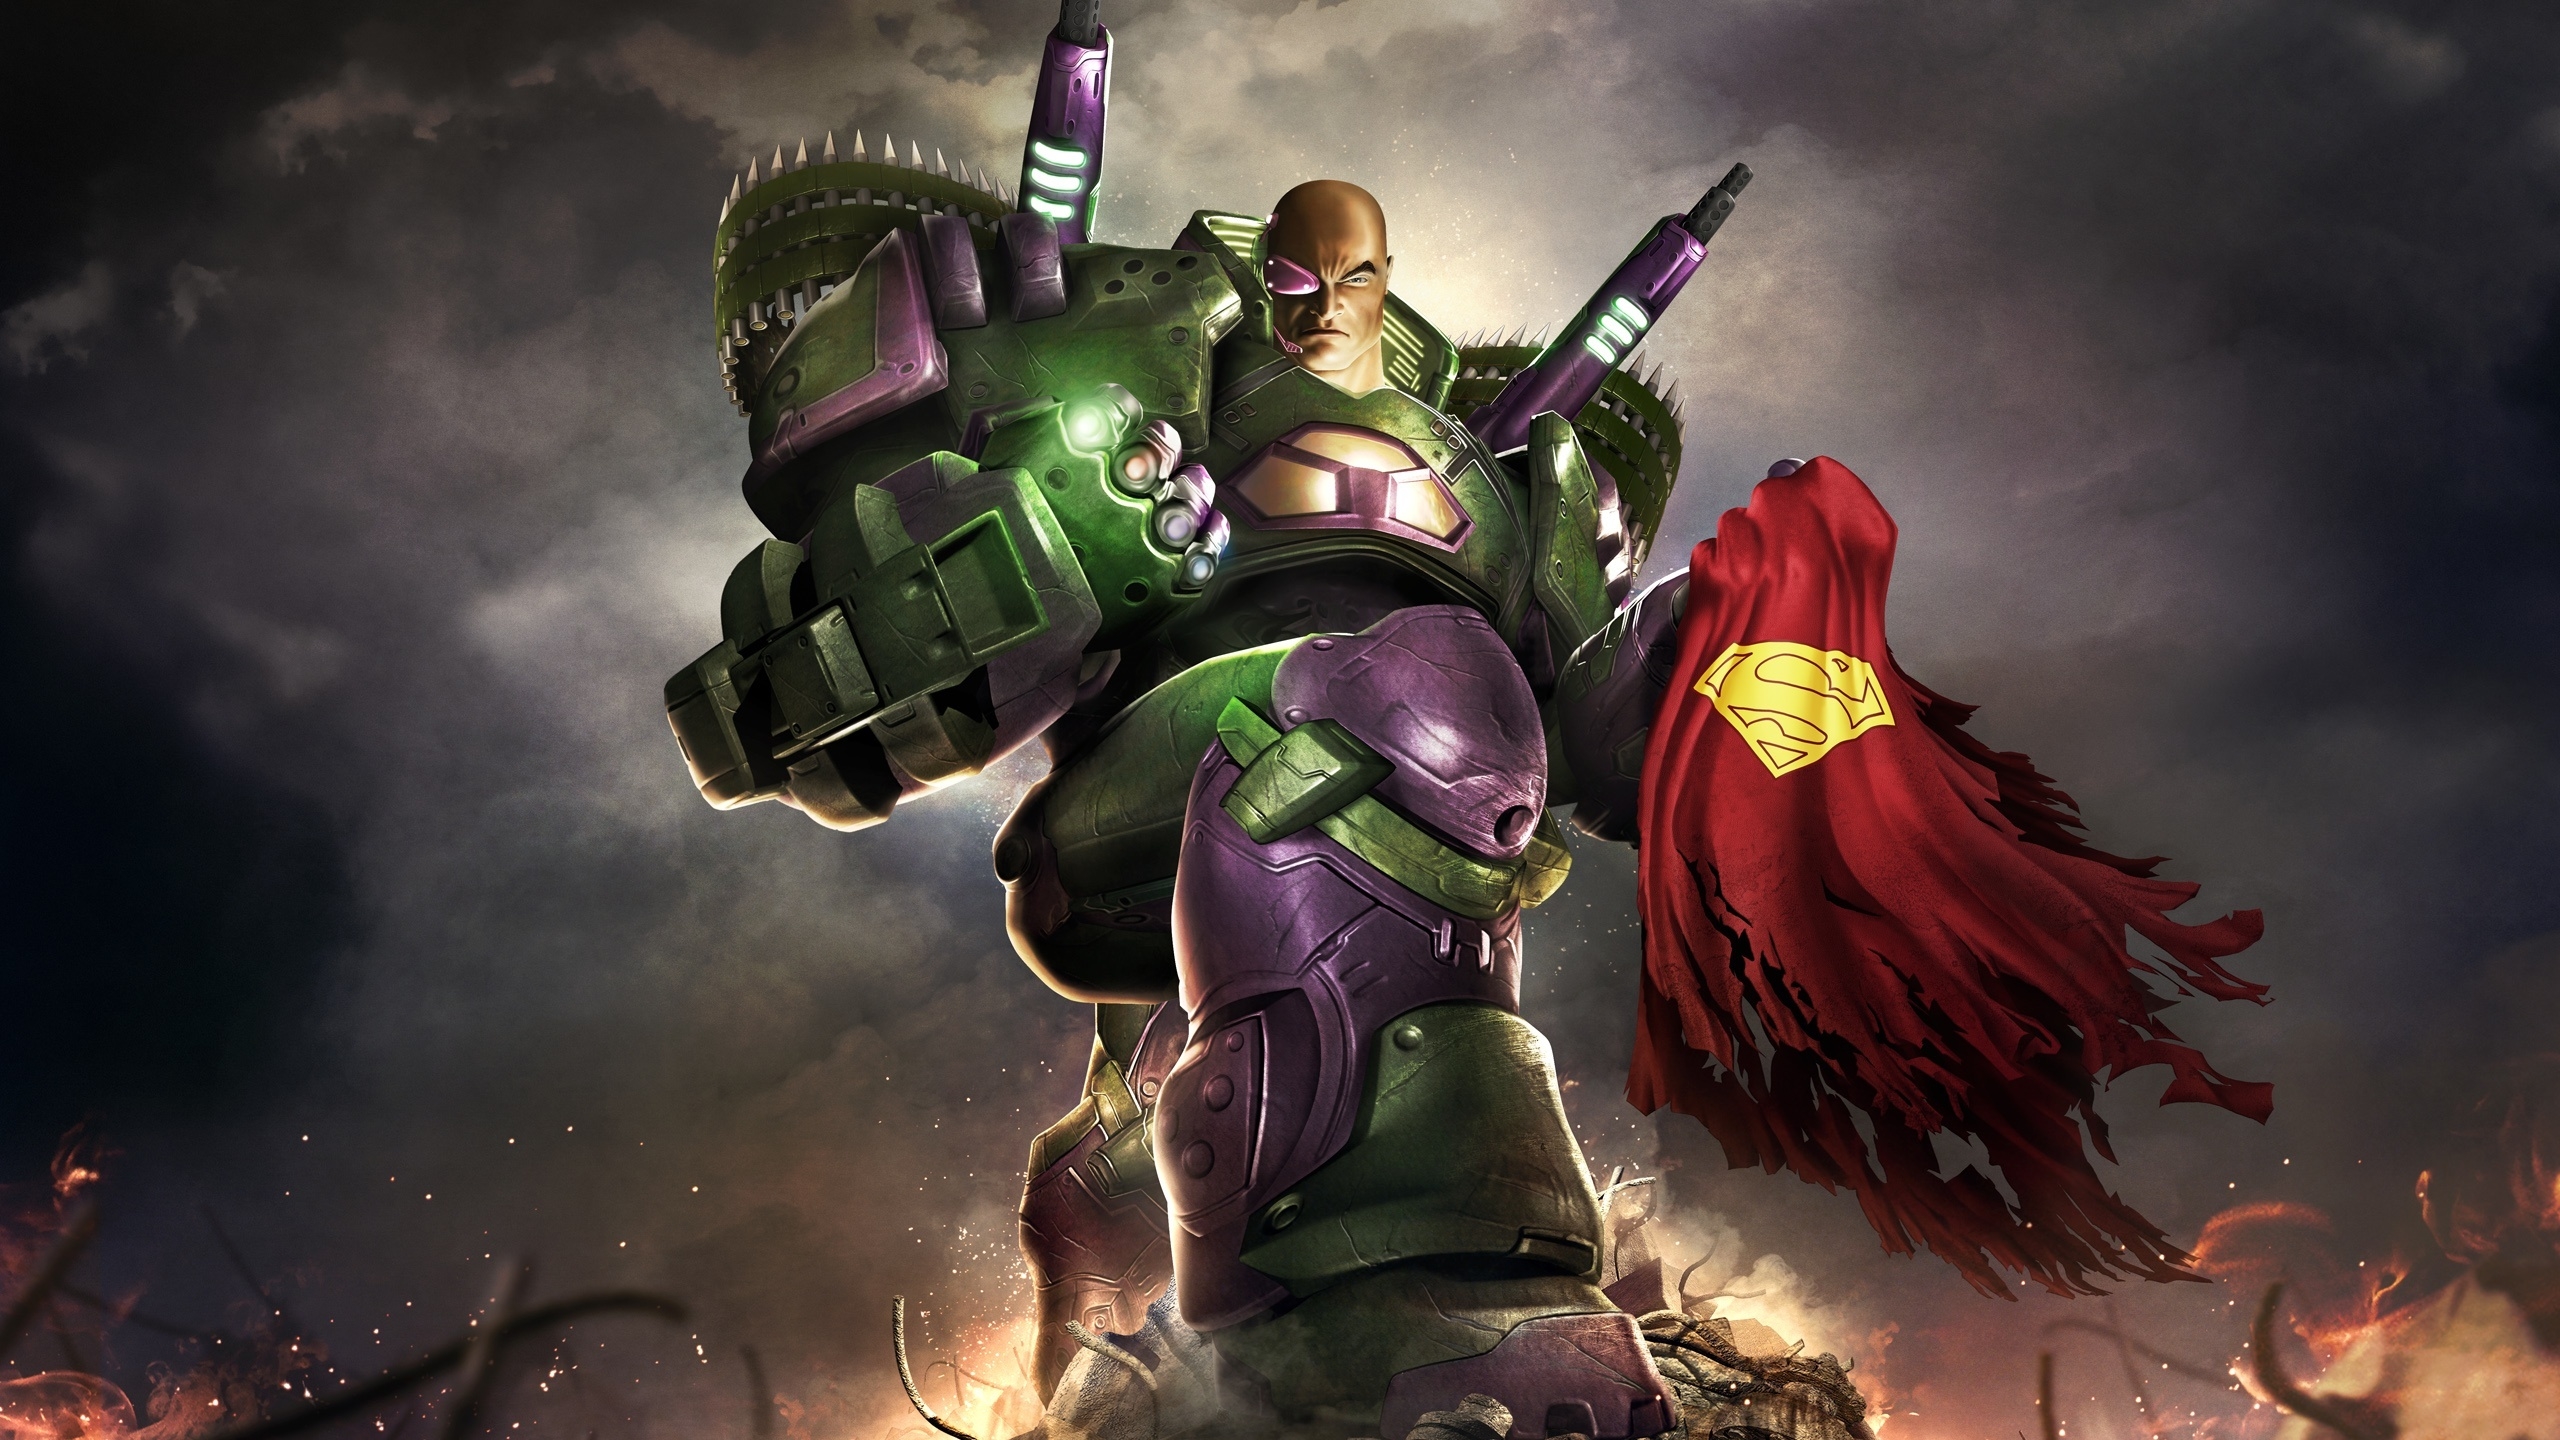 Lex Luthor DC Universe Online for 2560x1440 HDTV resolution